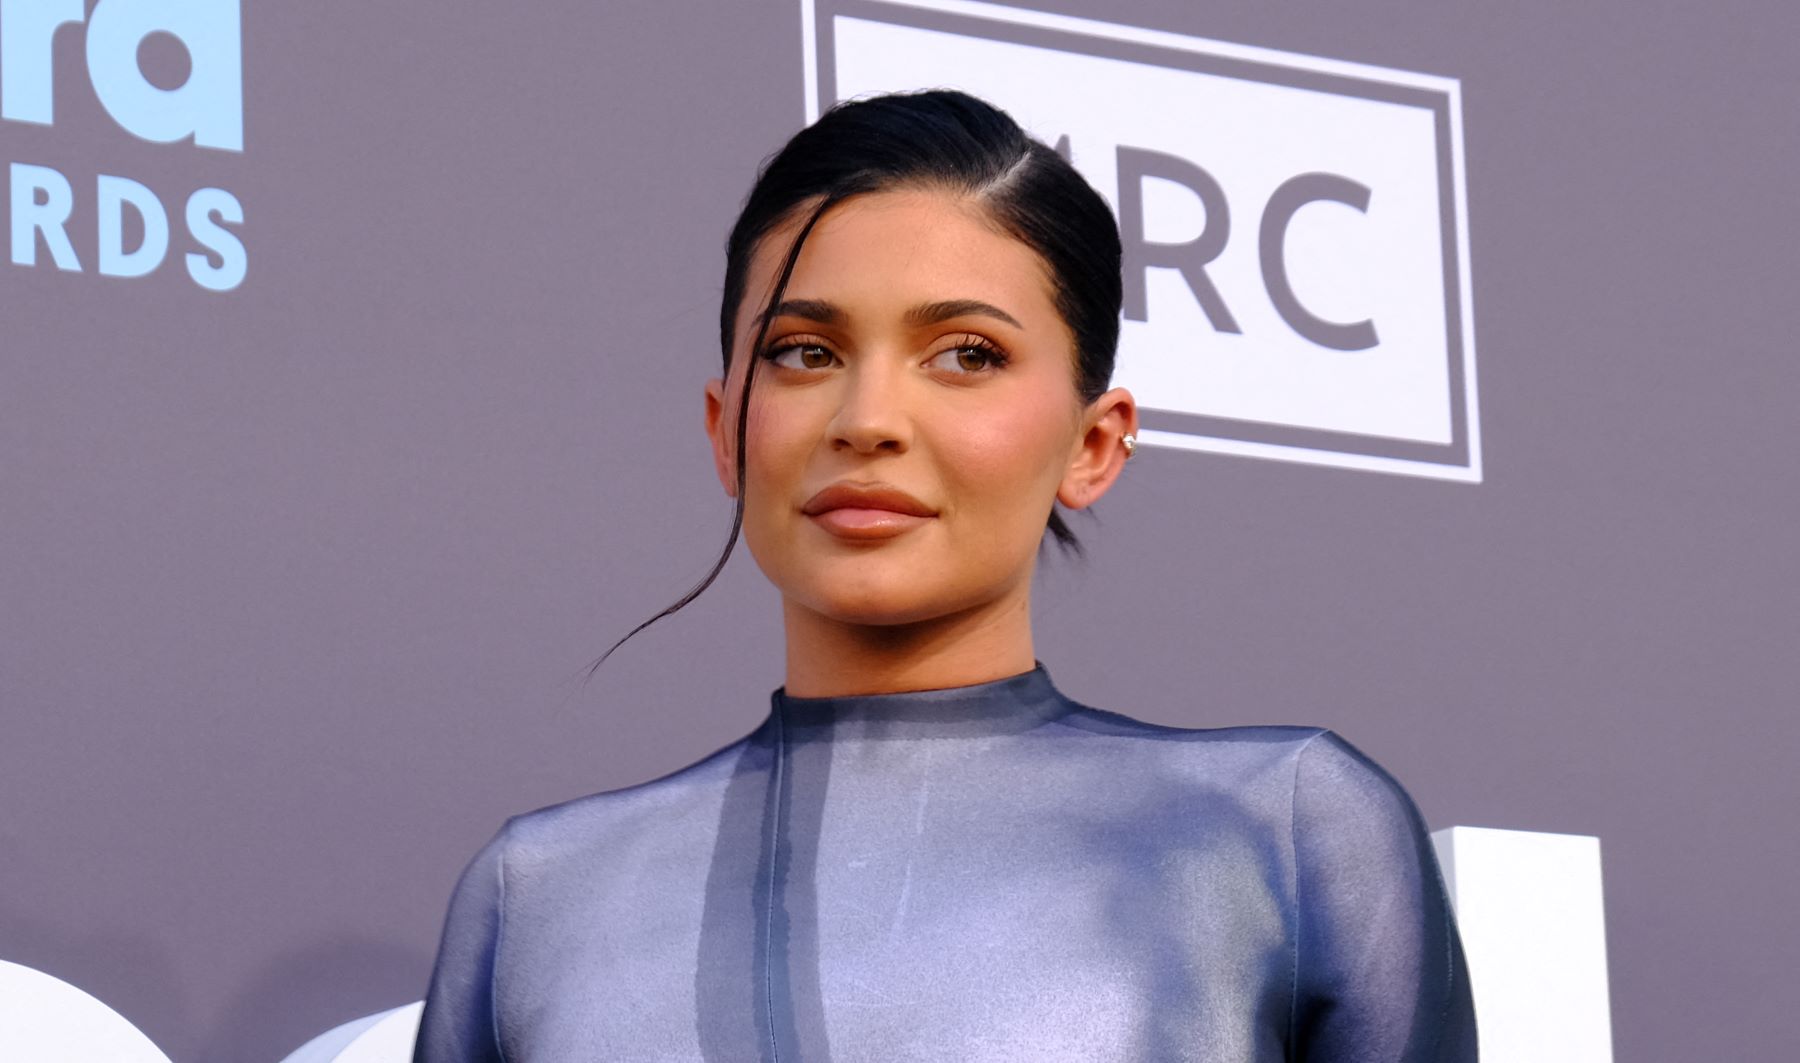 Kylie Jenner Is Acting Like Her ‘Old Self’, Fans Say